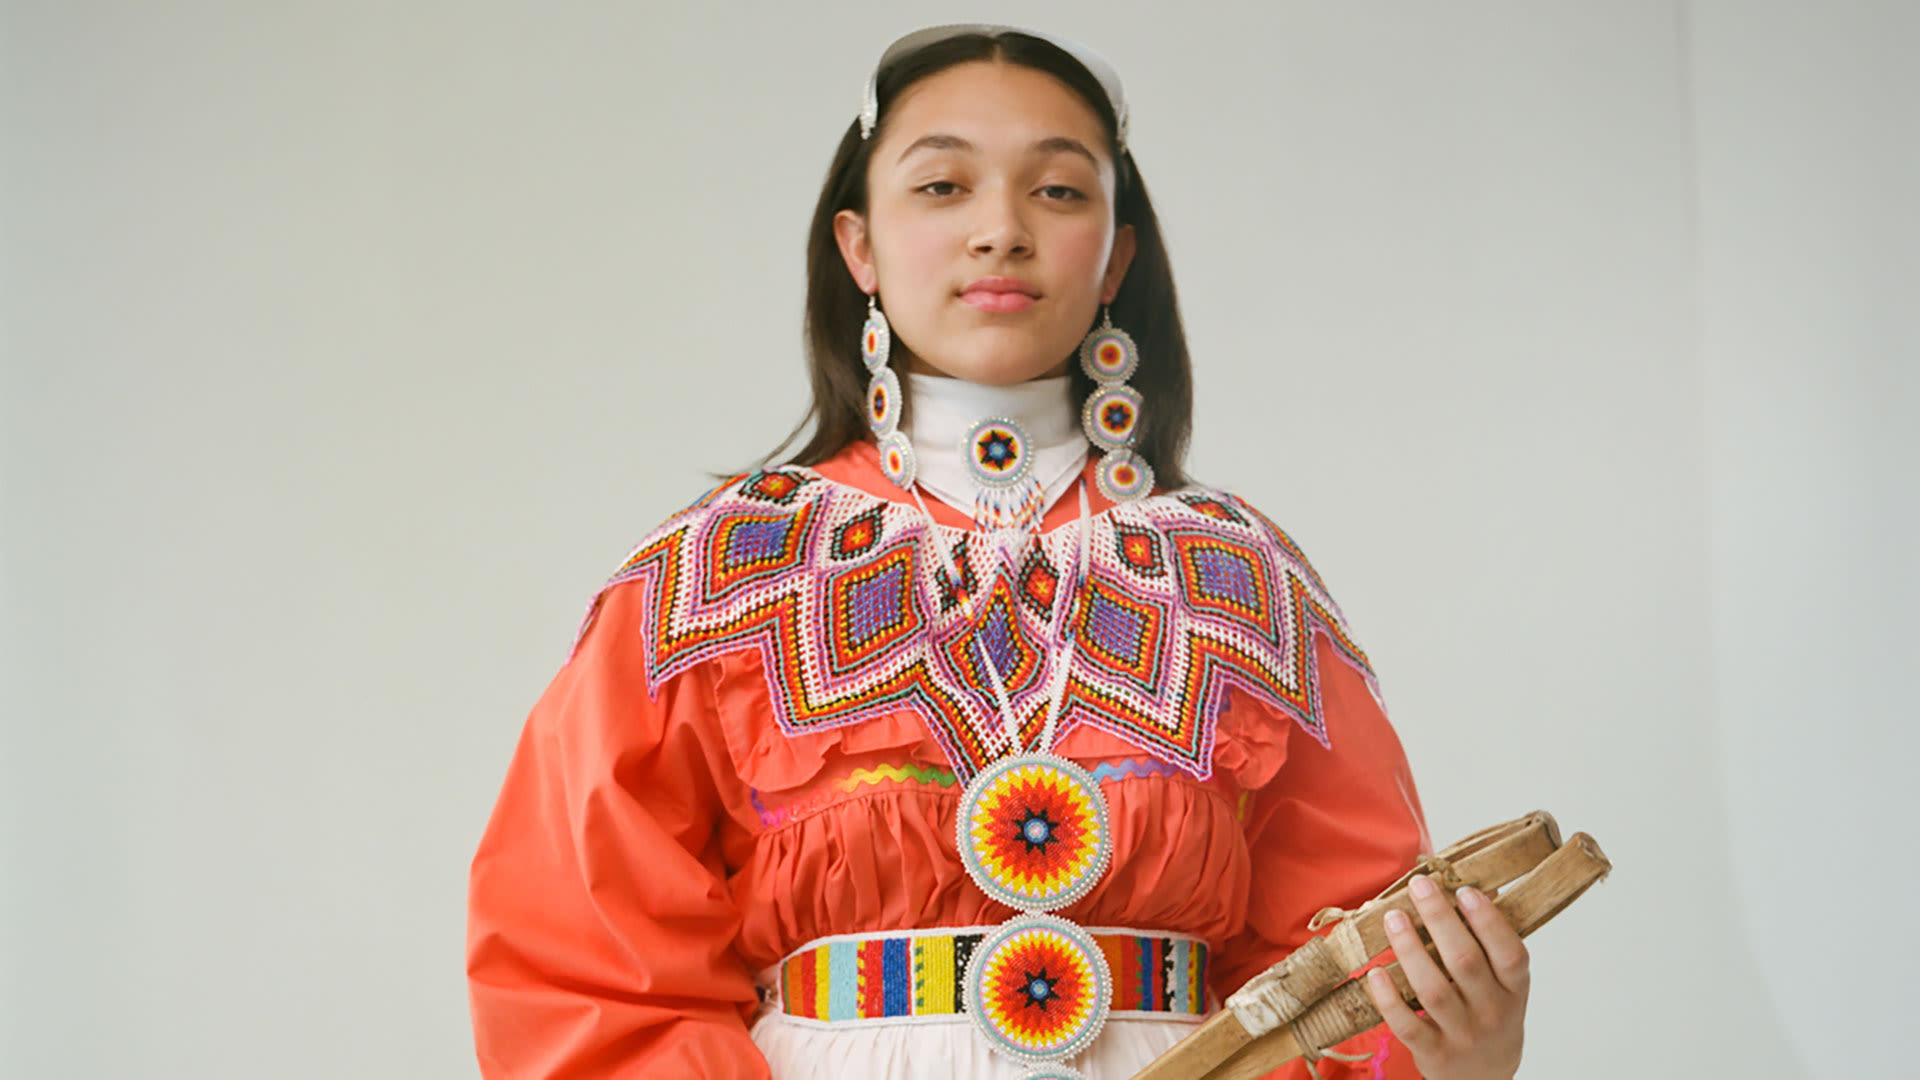 Watch 5 Girls on Why They're Proud to Be Native American